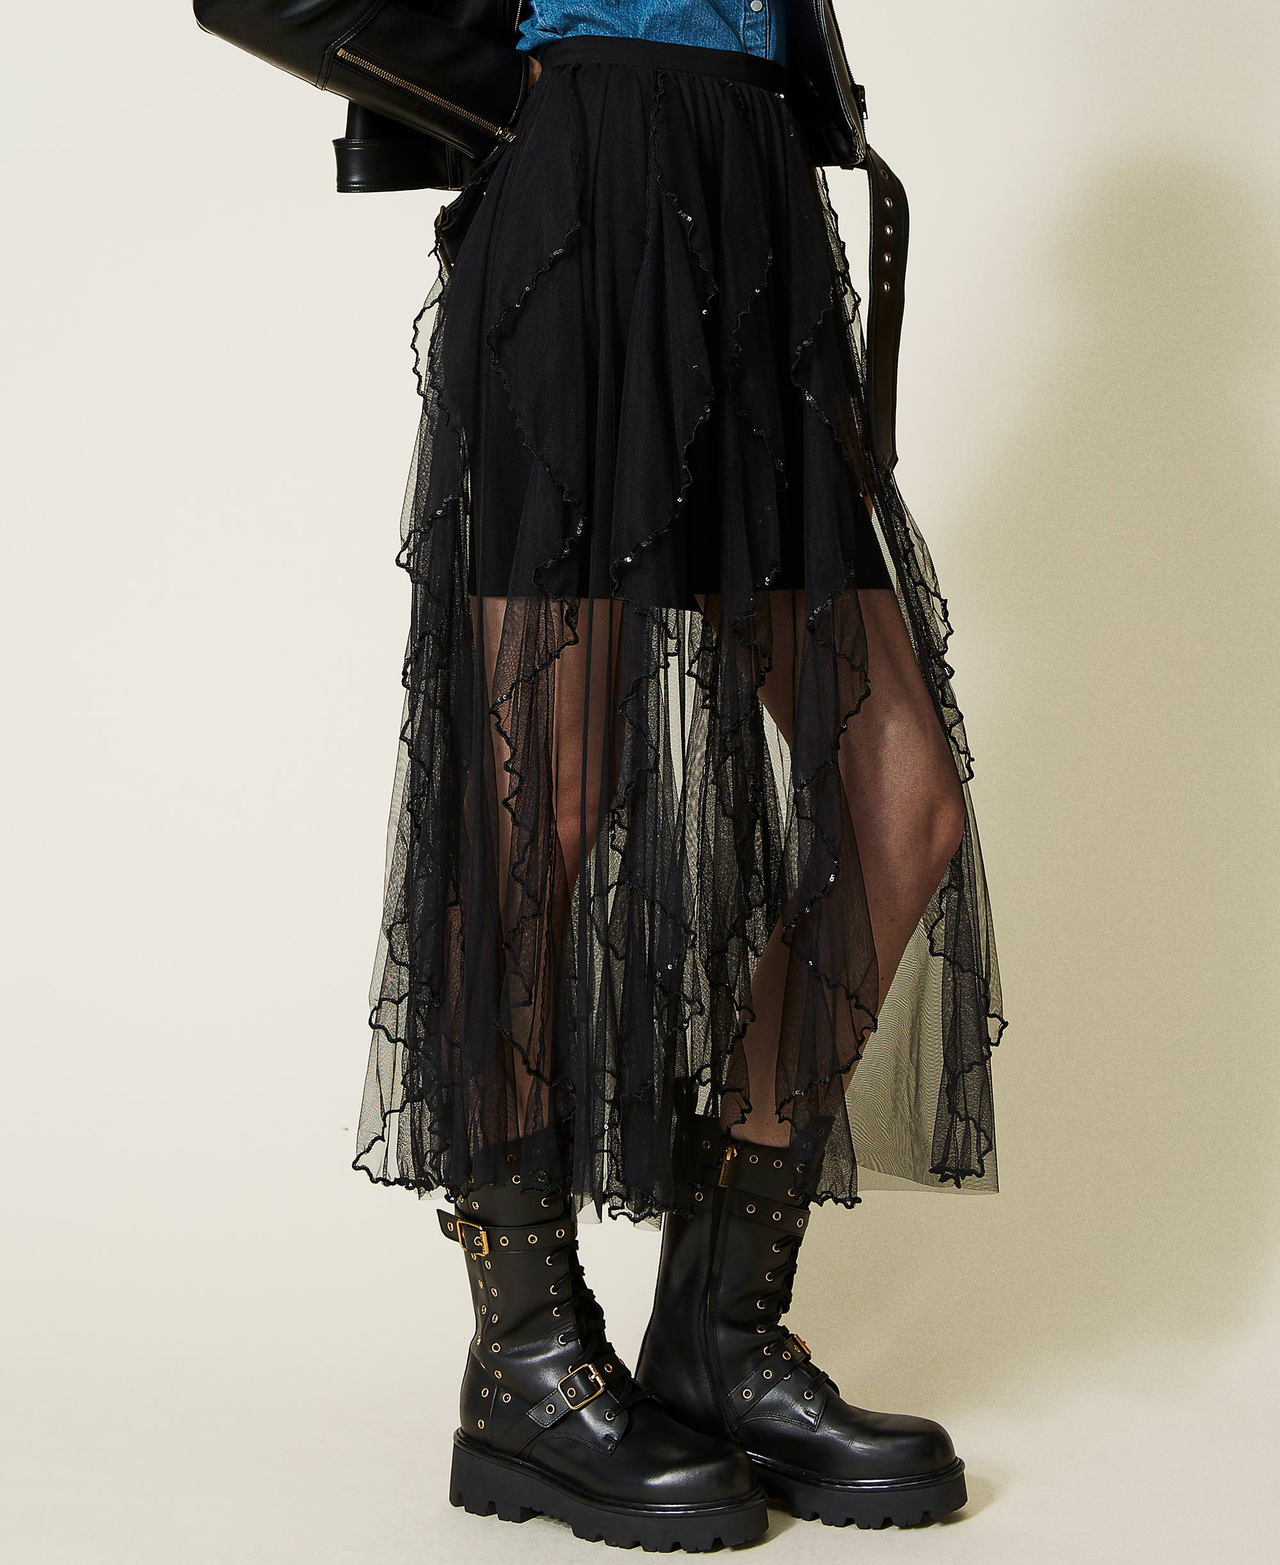 Long tulle skirt with ruffles Woman, Black